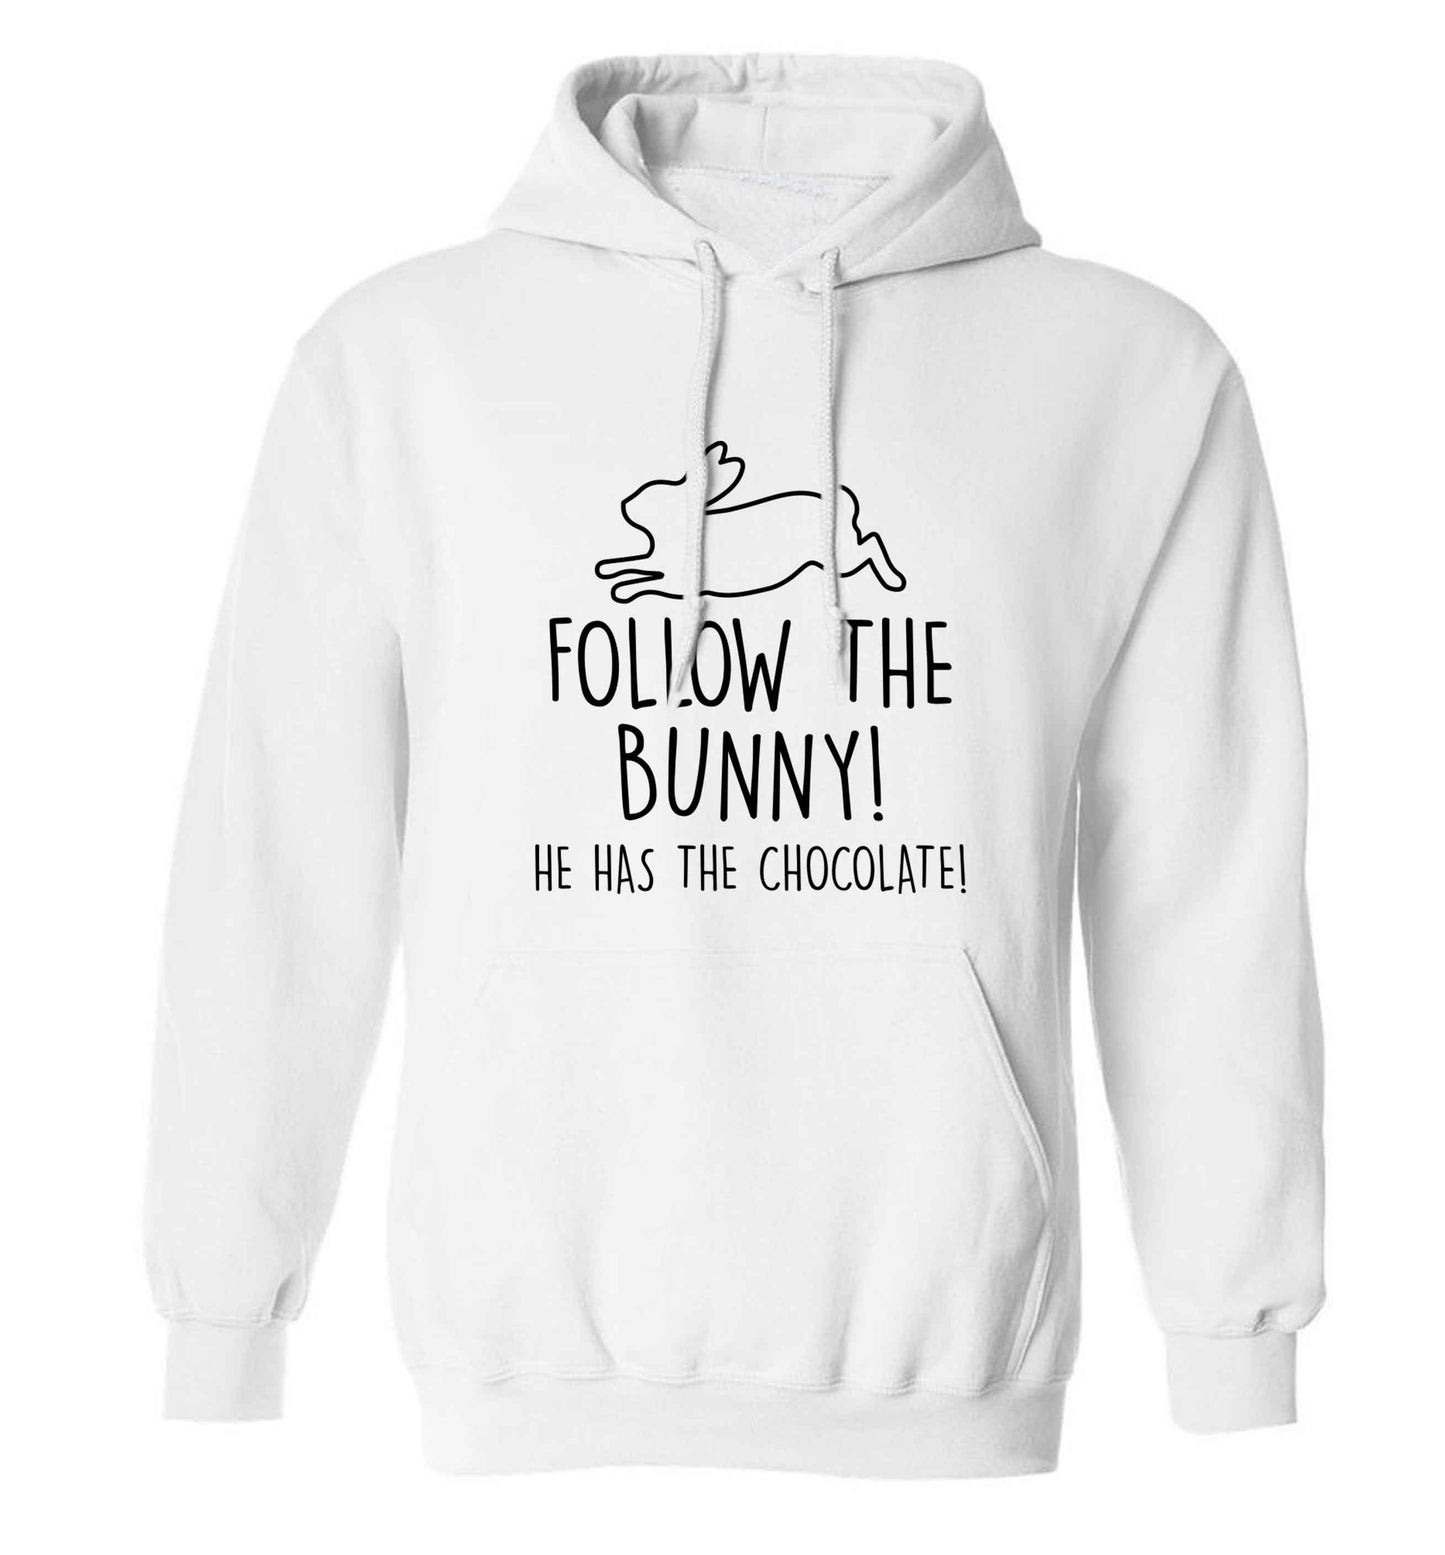 Follow the bunny! He has the chocolate adults unisex white hoodie 2XL